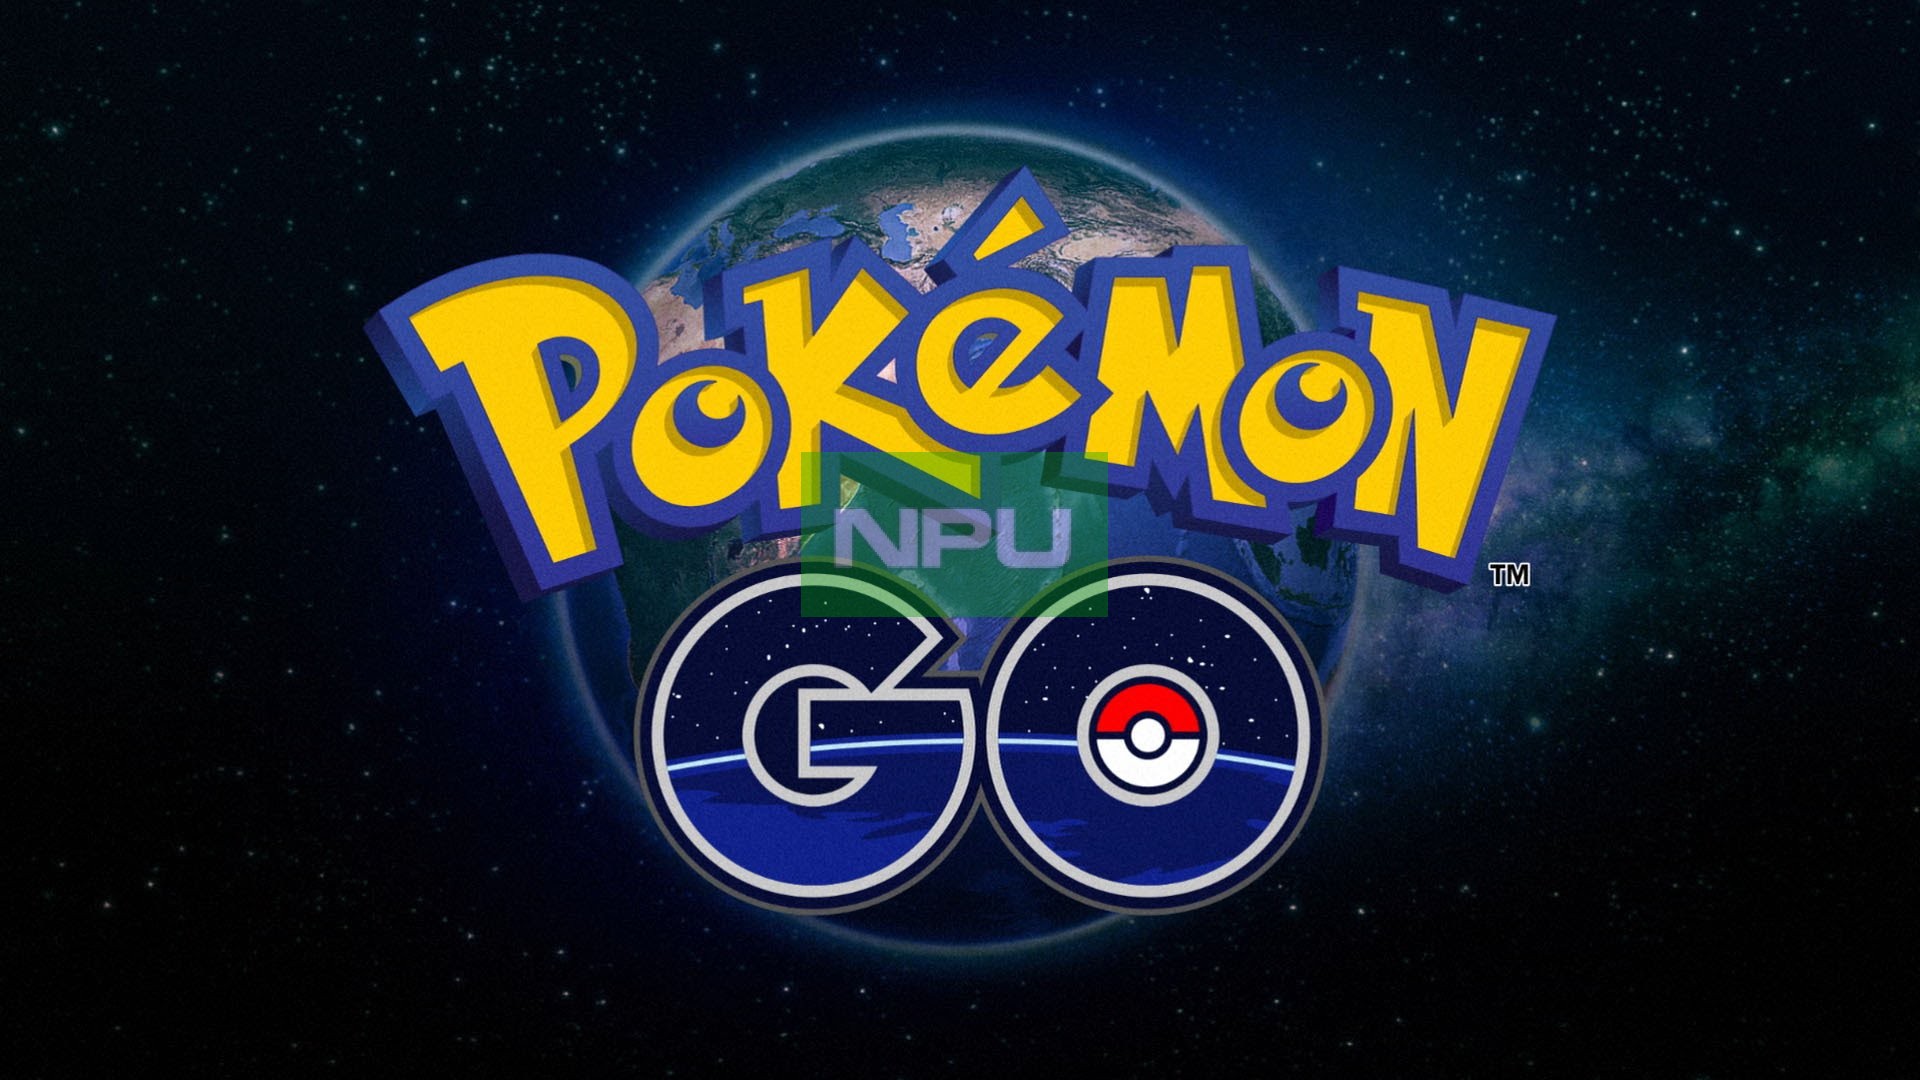 Pokémon Go download for Android, iPhone, and PC